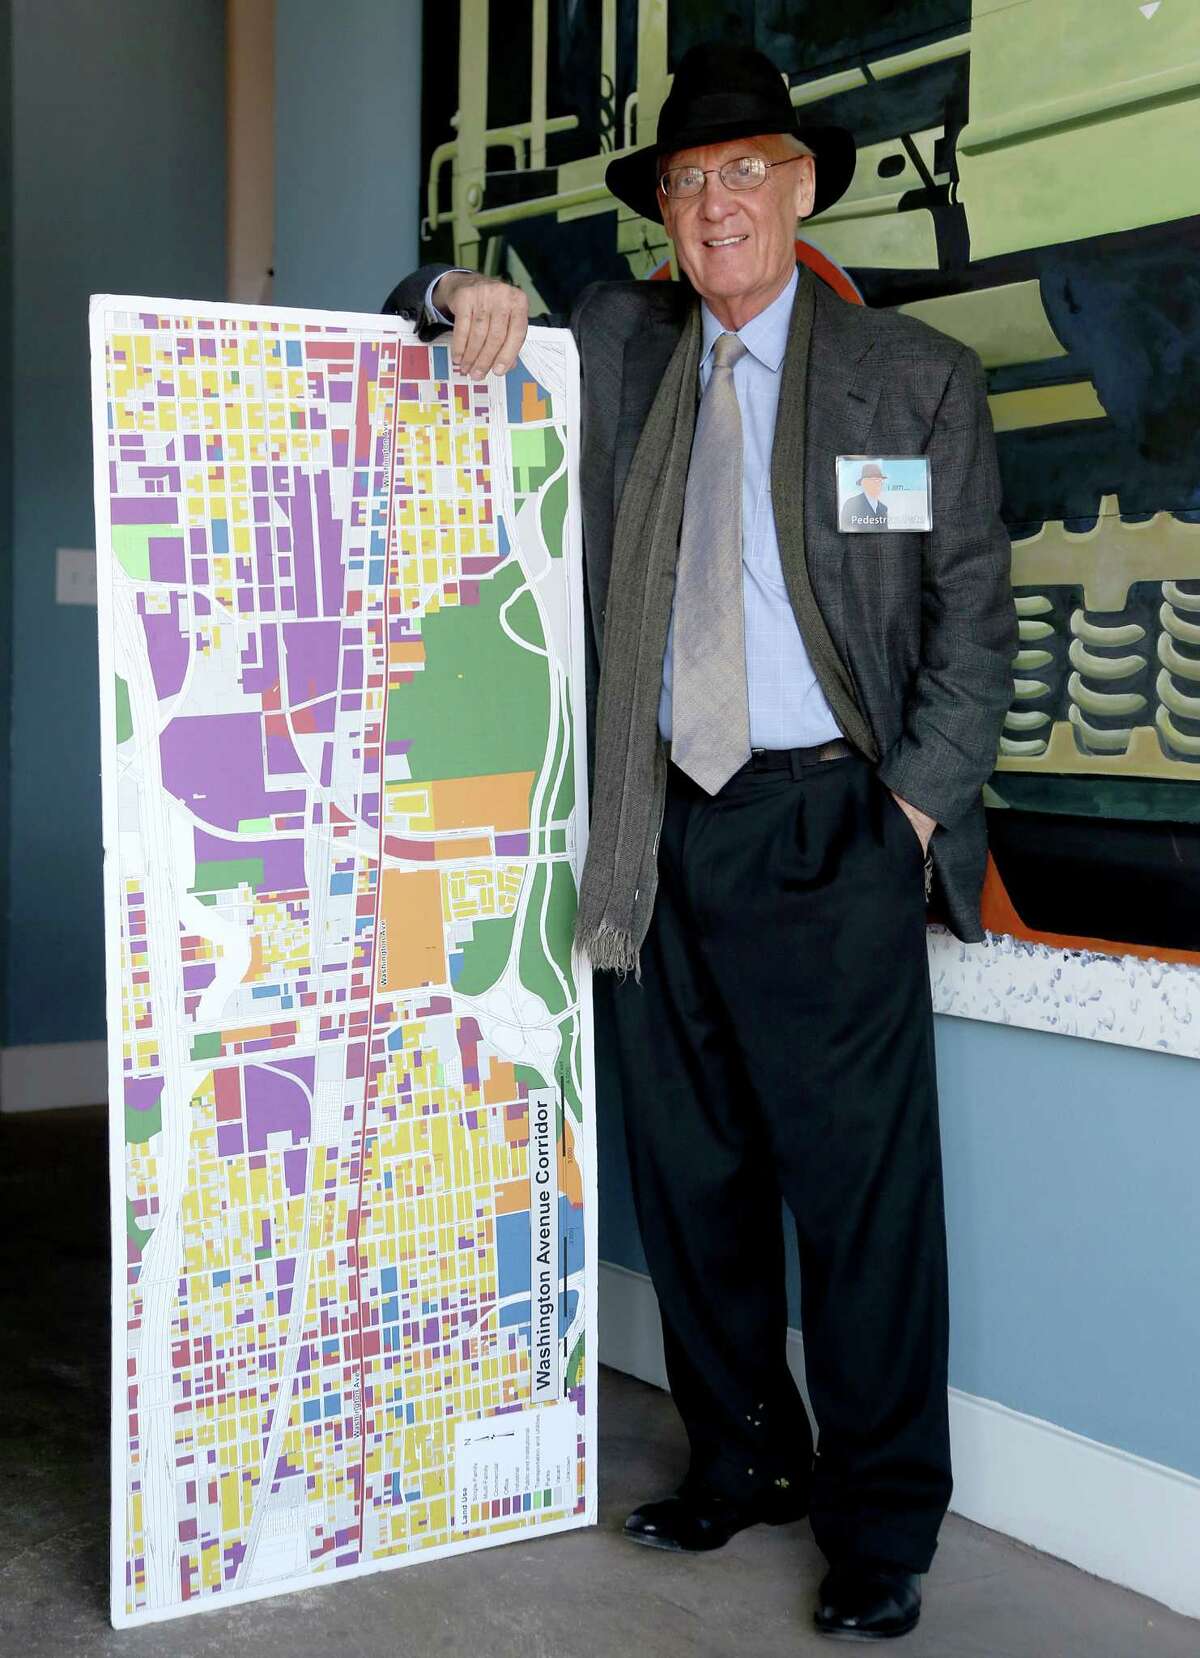 11/20/12: Pete Brown with a map of Washington Street. After very seriously running in 2009, architect and former city council member Peter Brown has transformed himself into Houston's leading utopian. His group, Better Houston, promotes urban planning and walkability. In on-line videos, Brown turns himself into a Stephen Colbert-like character, "Pedestrian Pete," who walks around the city with guests, chatting about the good, the bad and the ugly.